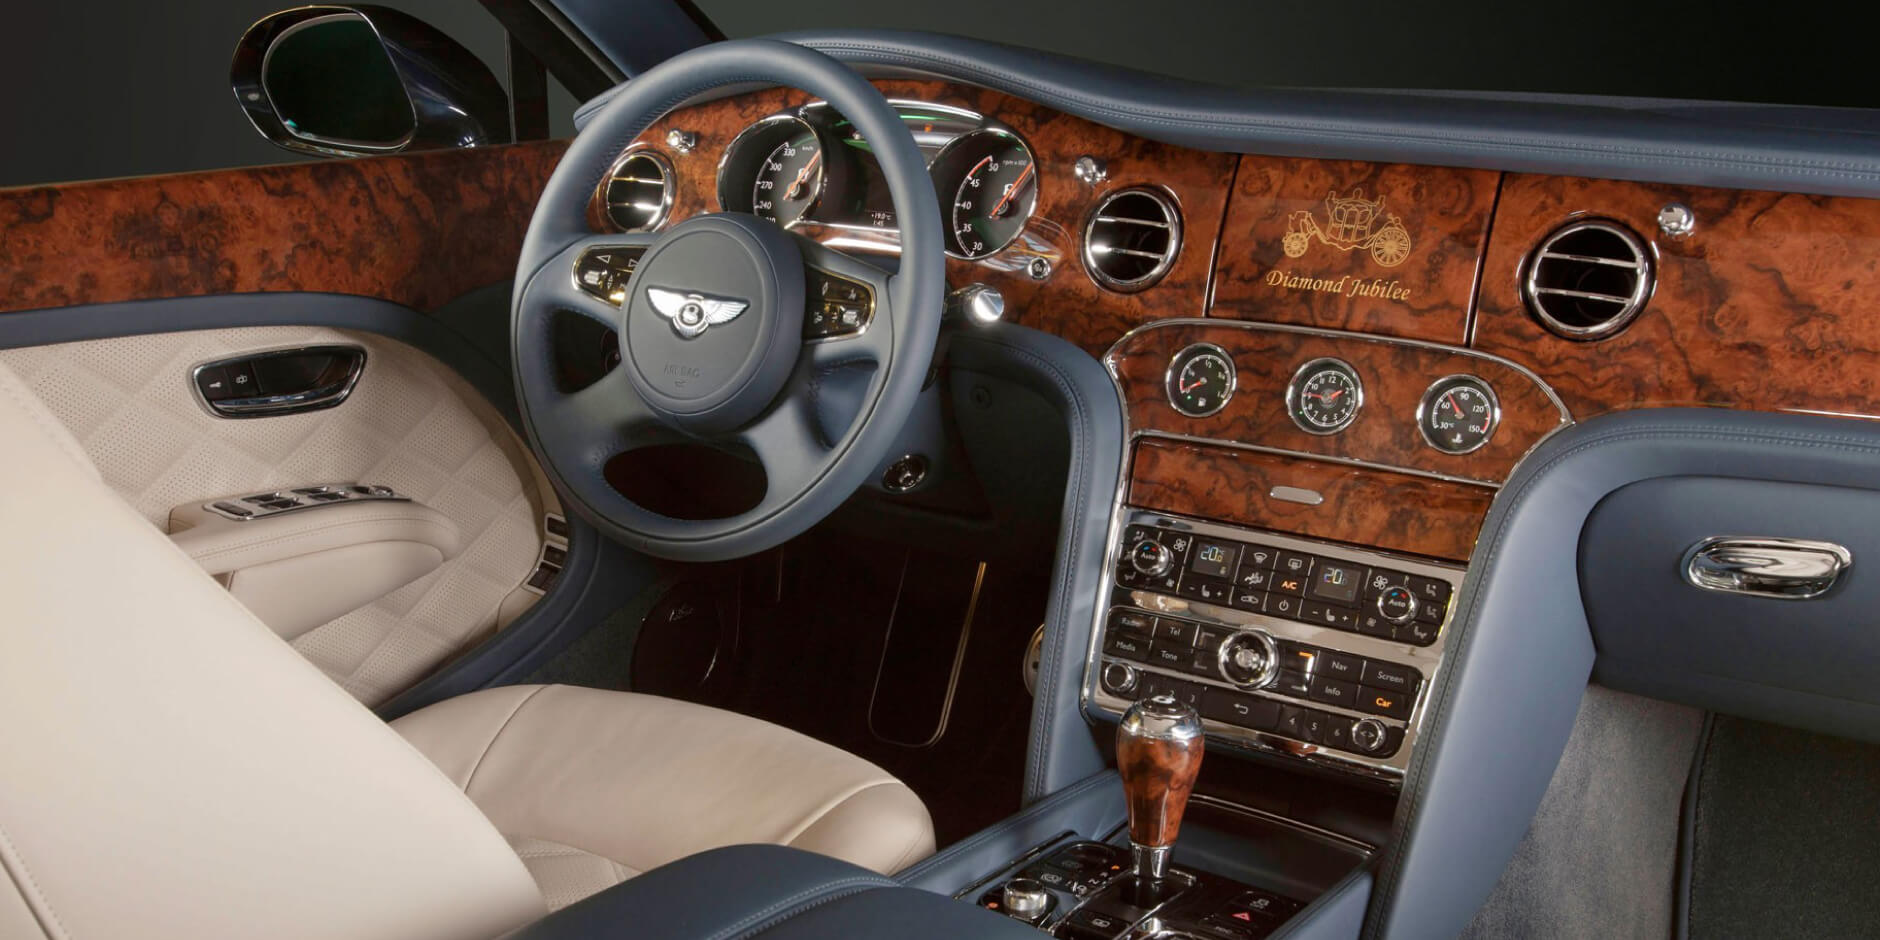 Maintaining Your Class: Tips on Caring for Your Bentley Mulsanne in the UK Climate